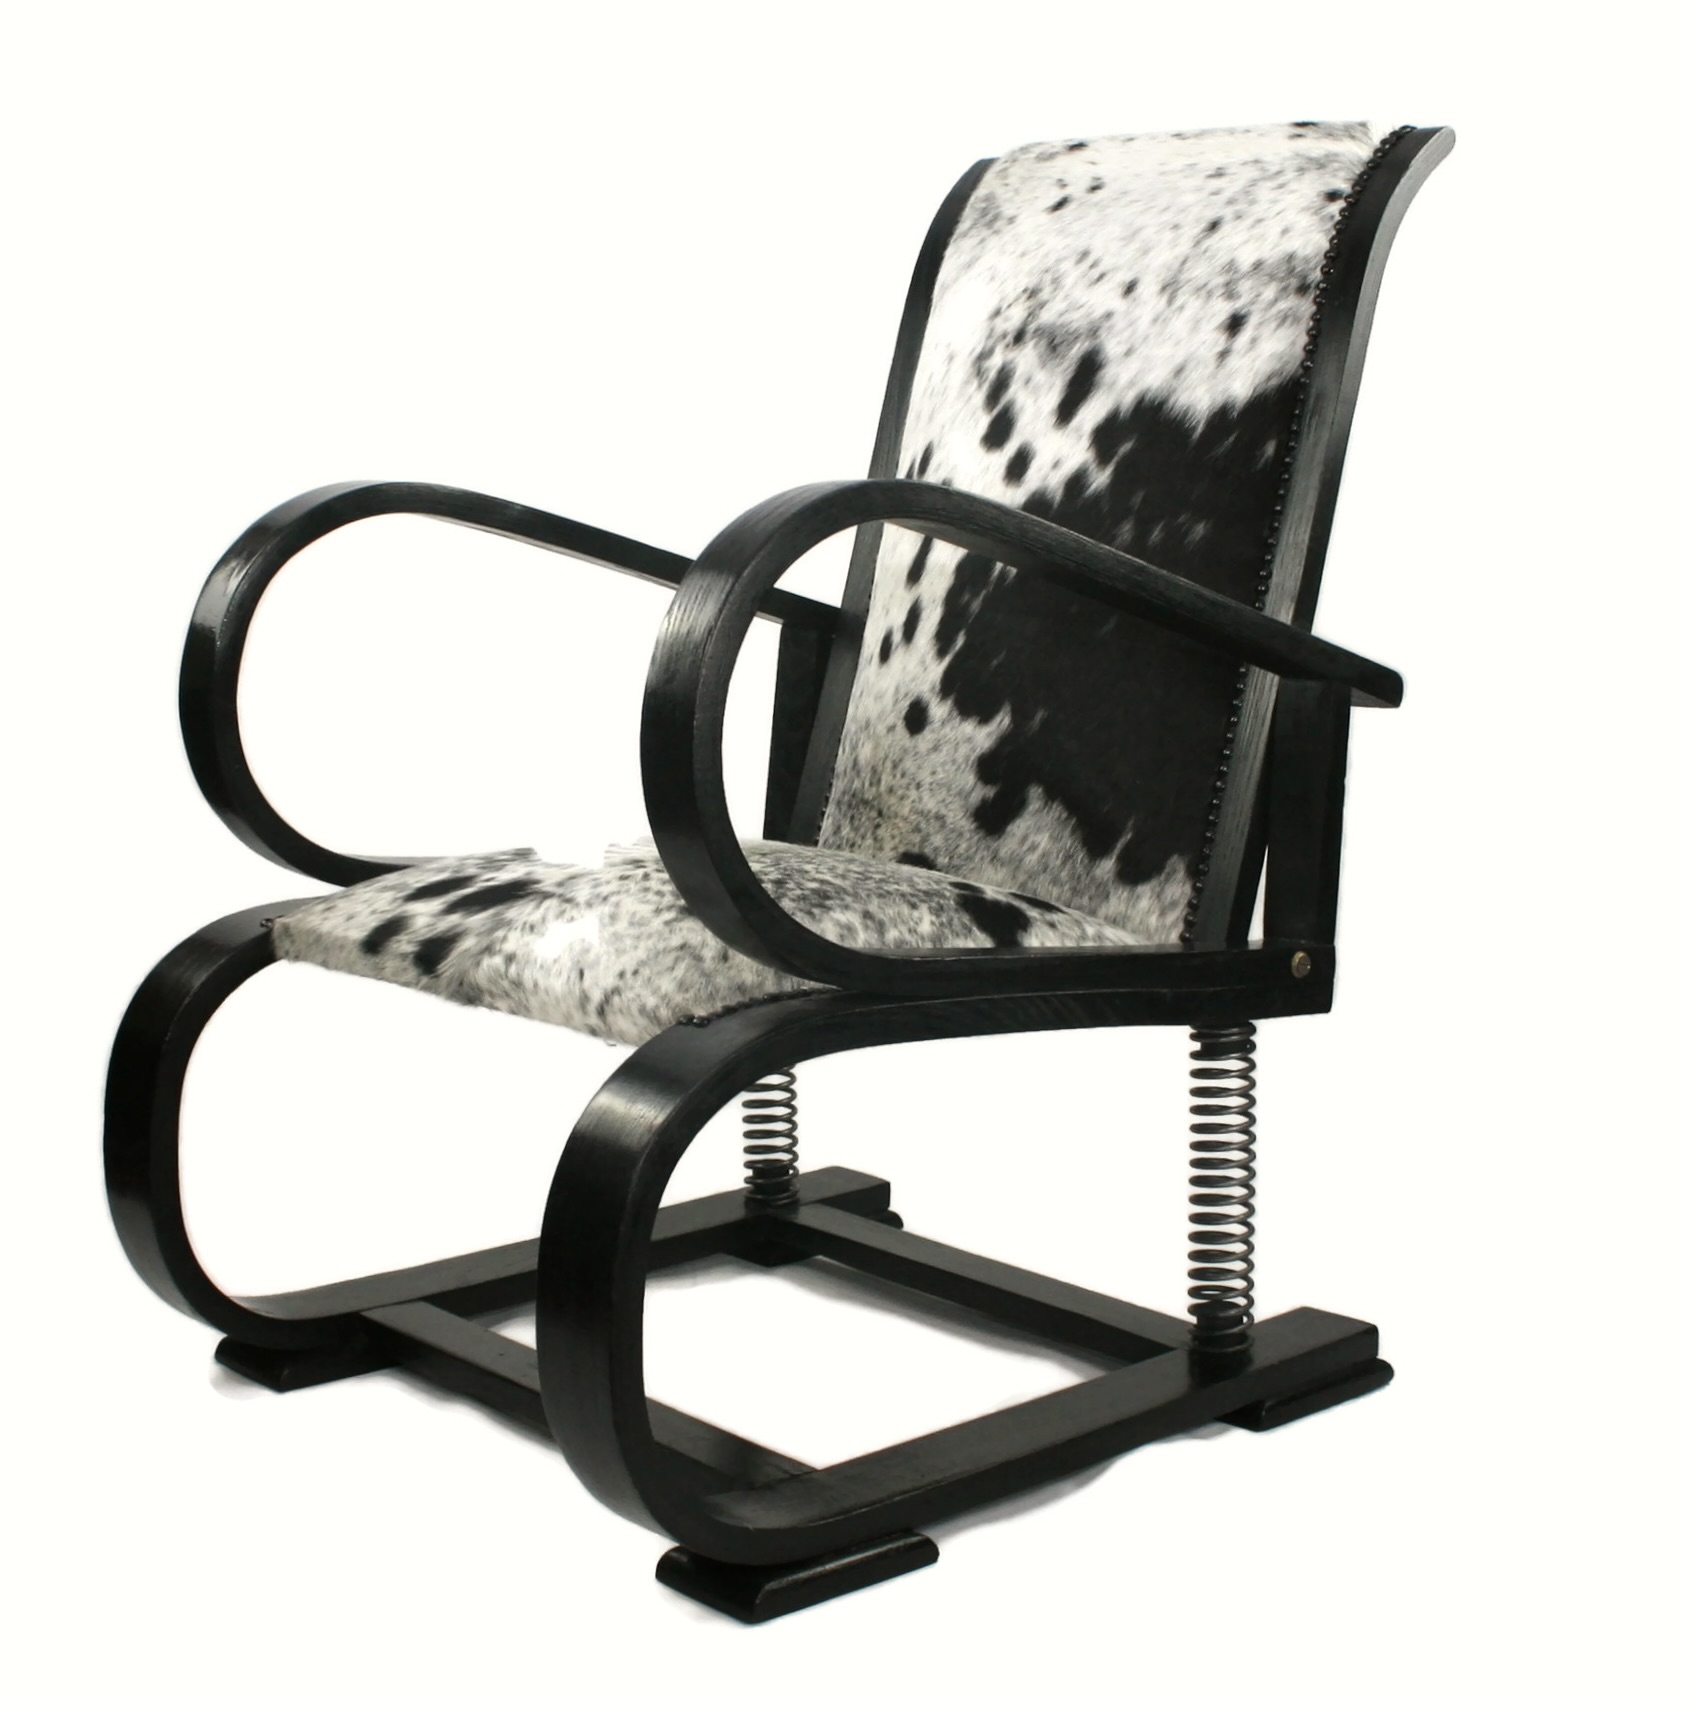 ttps://bouncingharecreations.co.uk/product/French Art Deco Ebonized Rocking Chair In South American Cow Hide / ‎